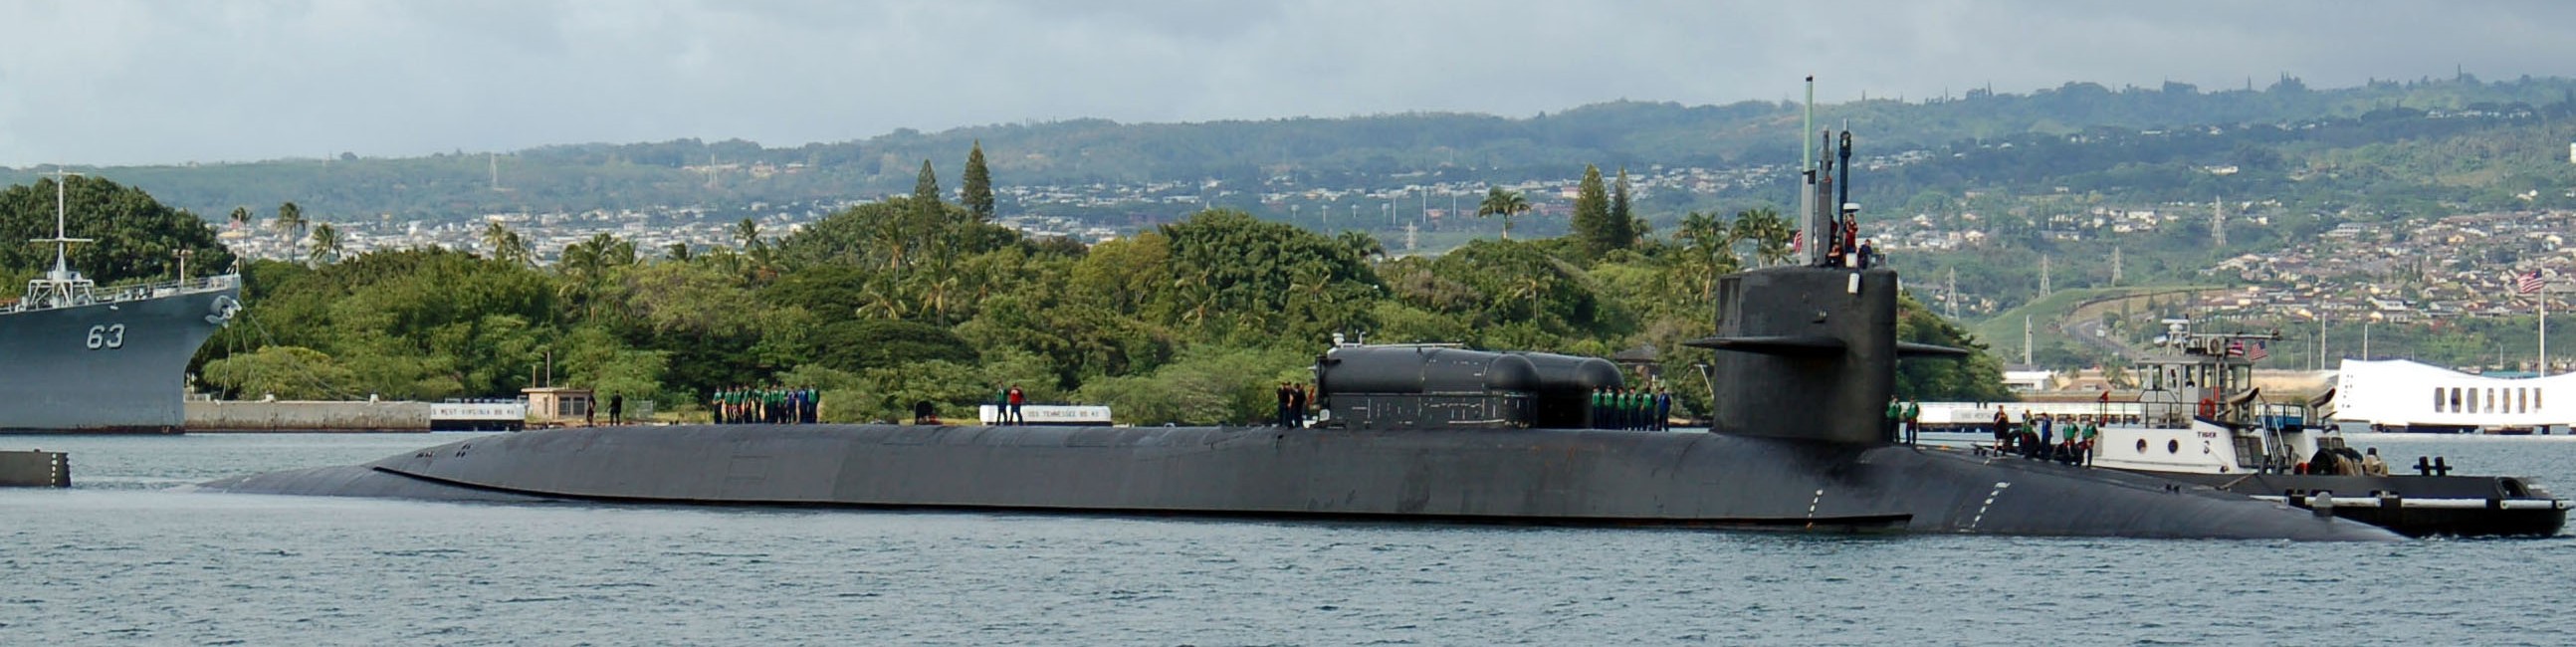 ssgn-726 uss ohio guided missile submarine us navy 2008 36 pearl harbor hawaii